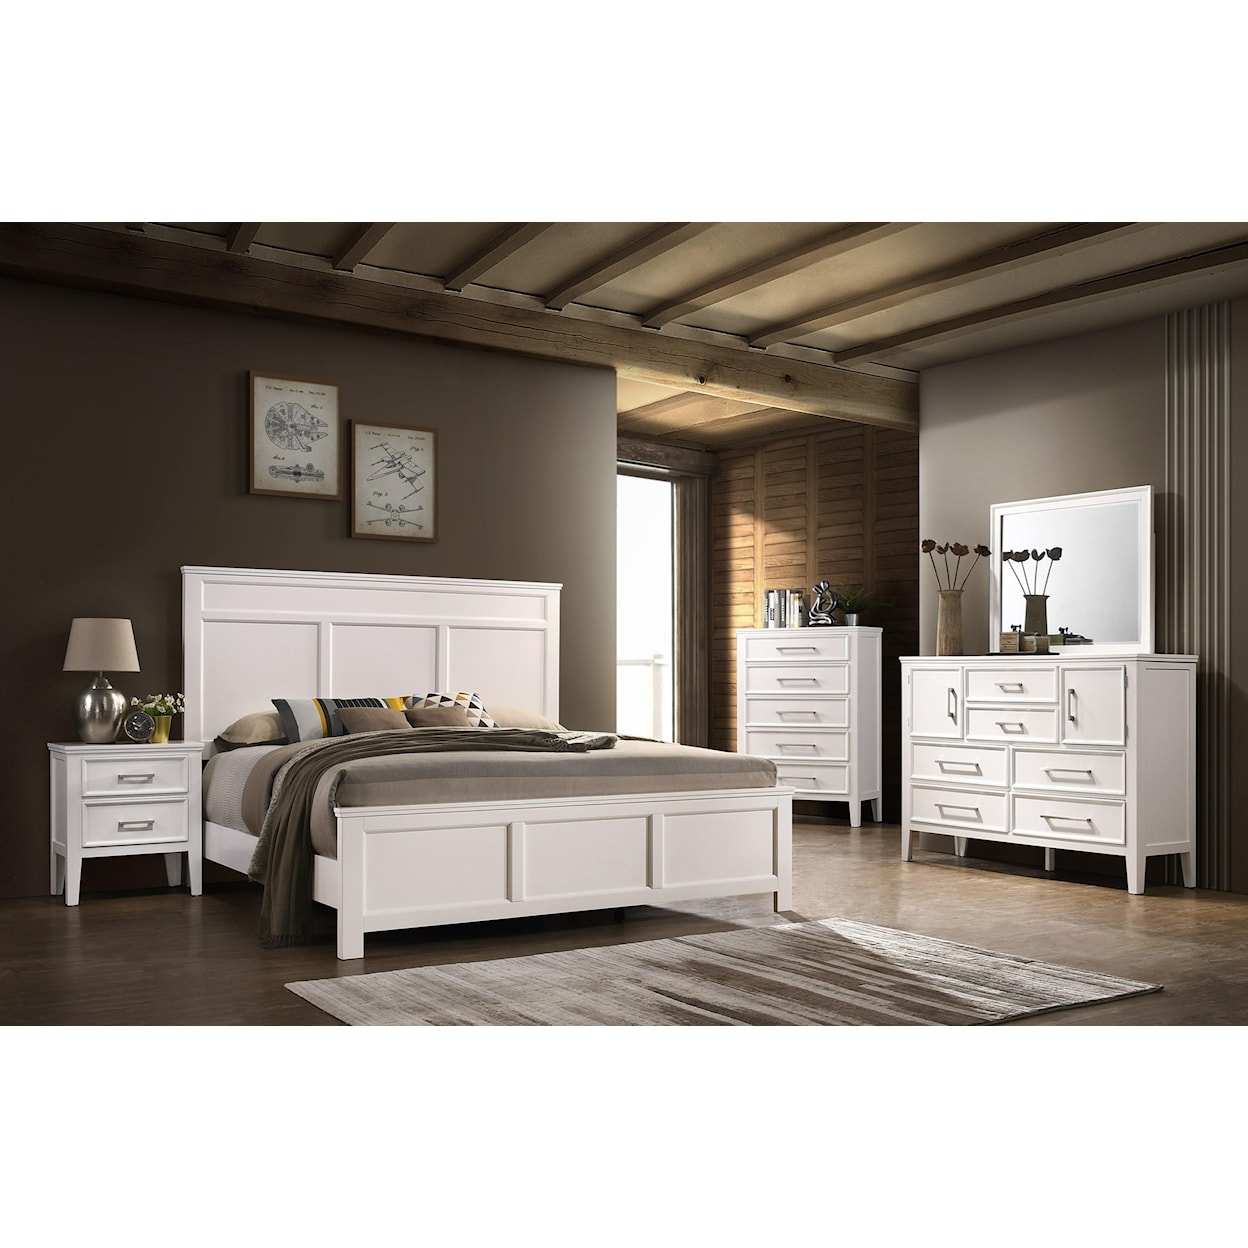 New Classic Andover 6 Piece Full Bedroom Group